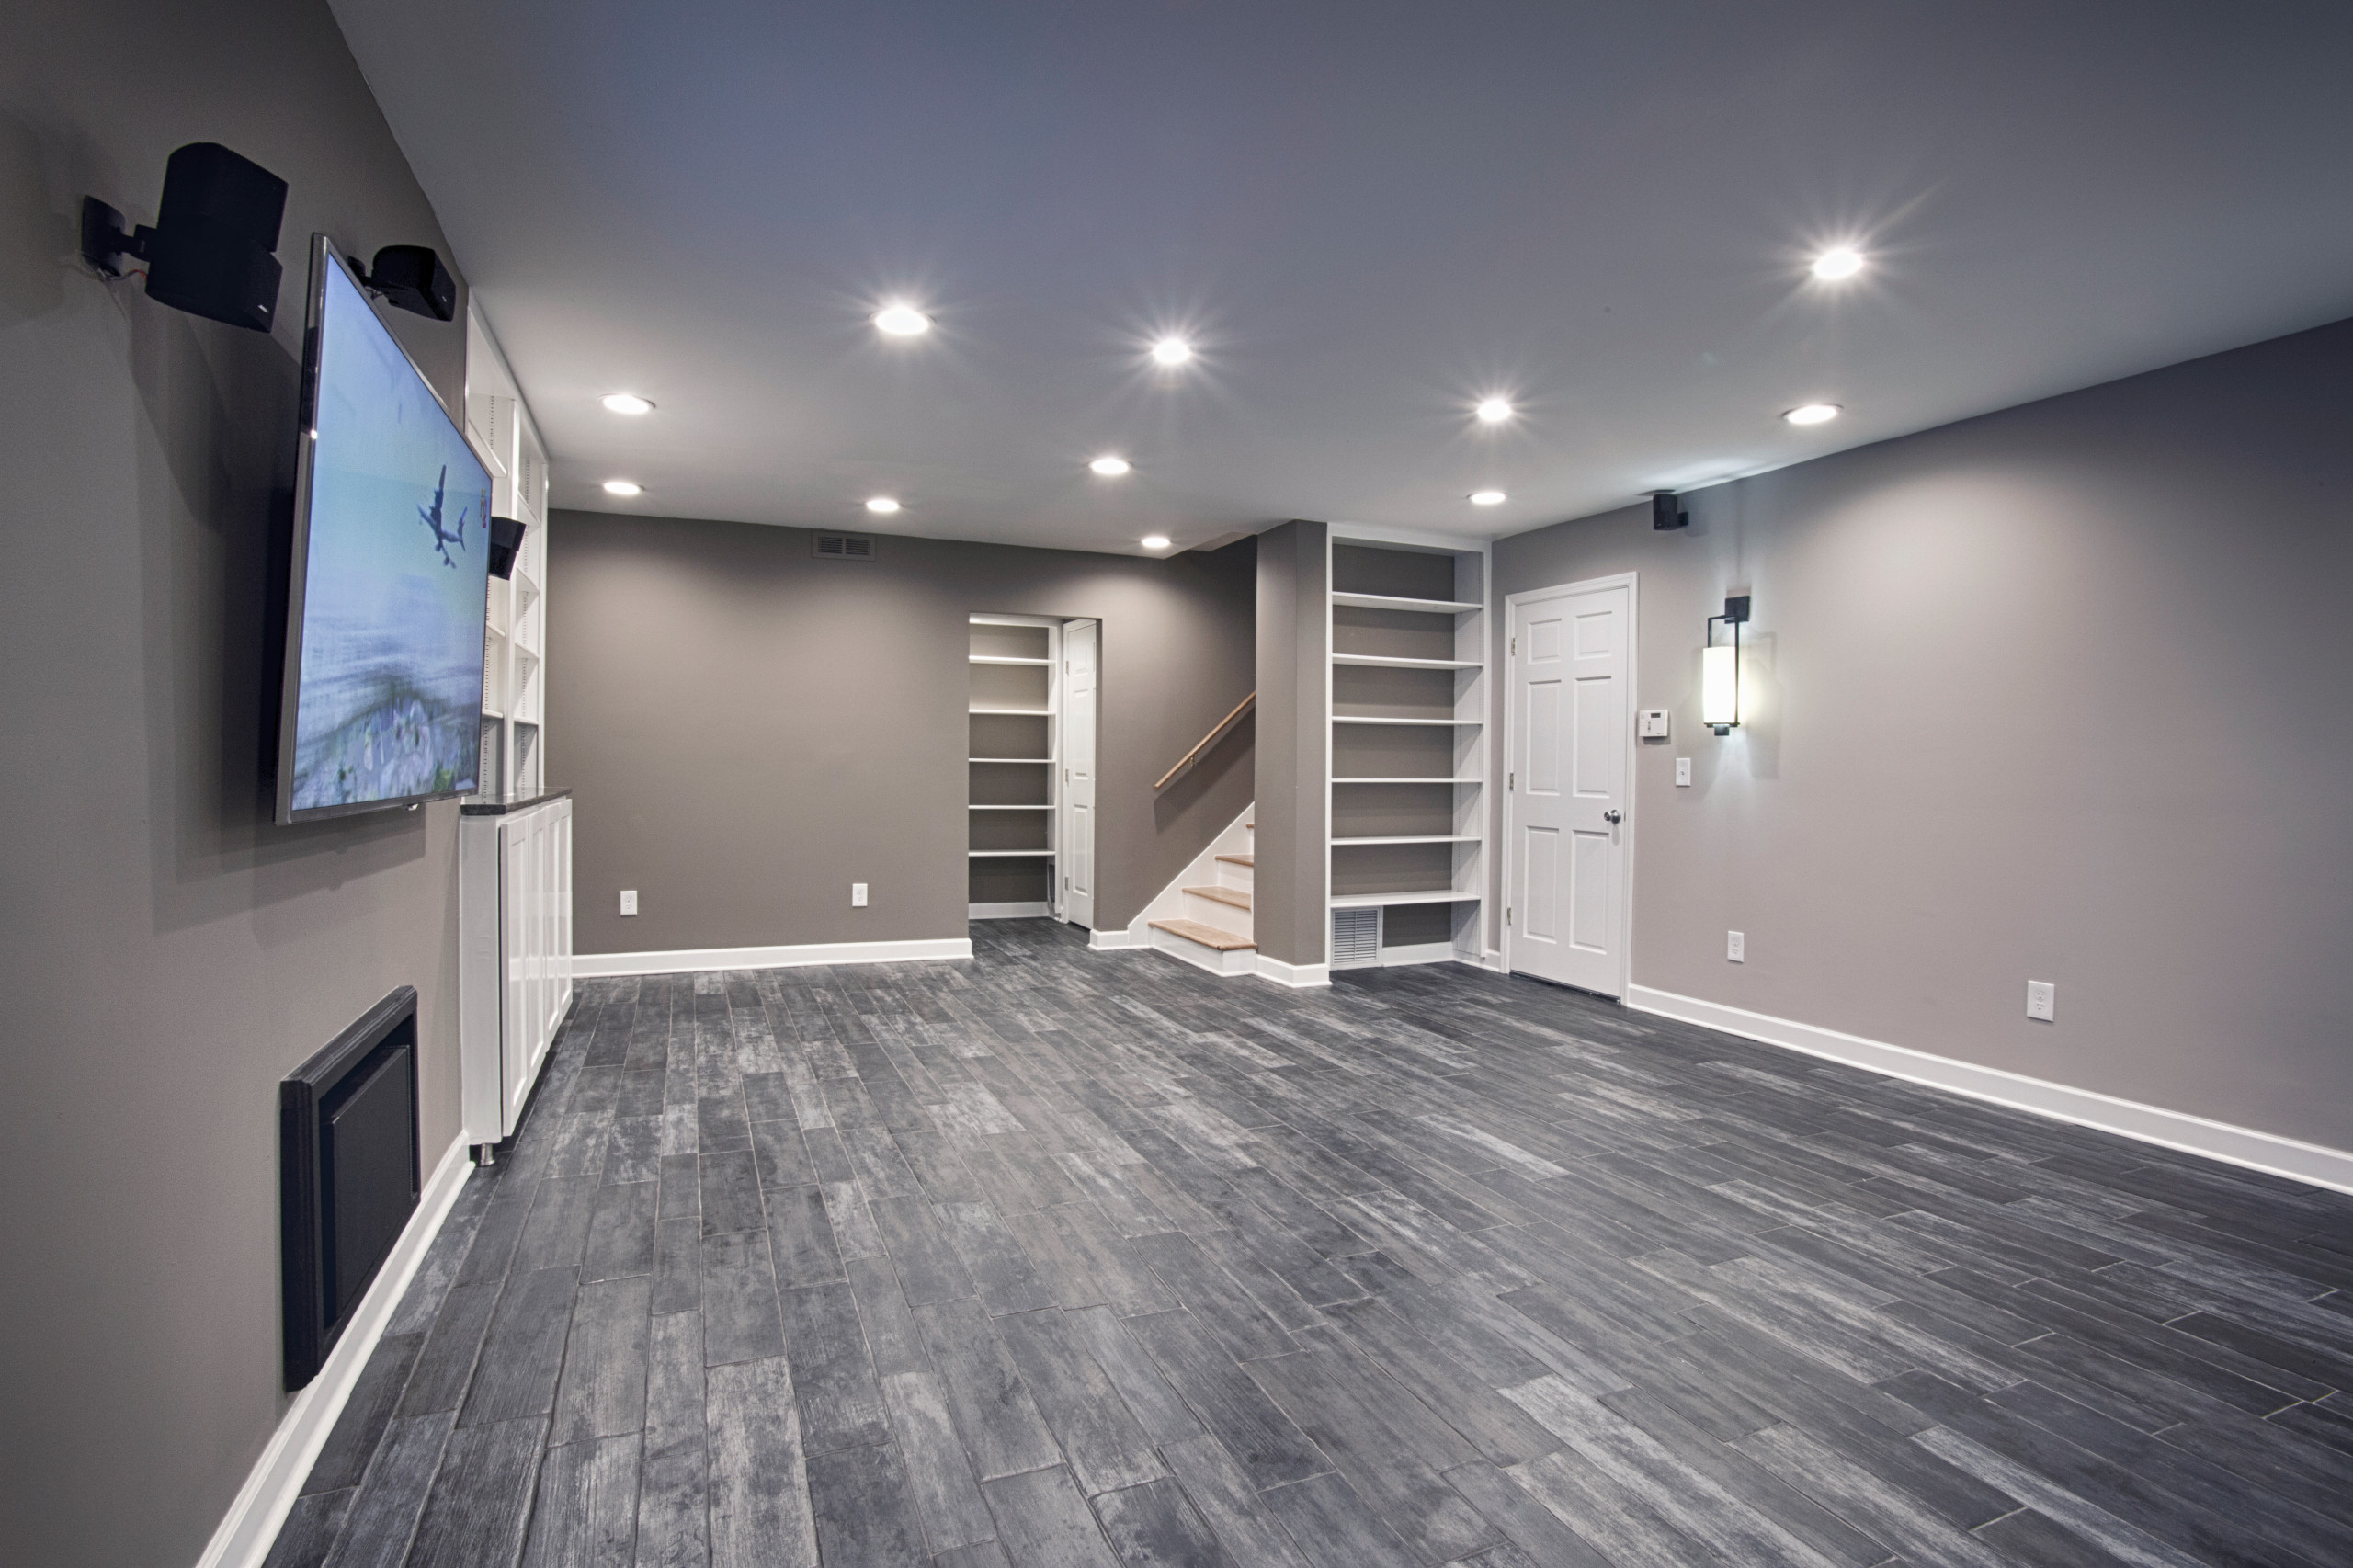 Basement Stairs In Center Of Room   Photos & Ideas   Houzz